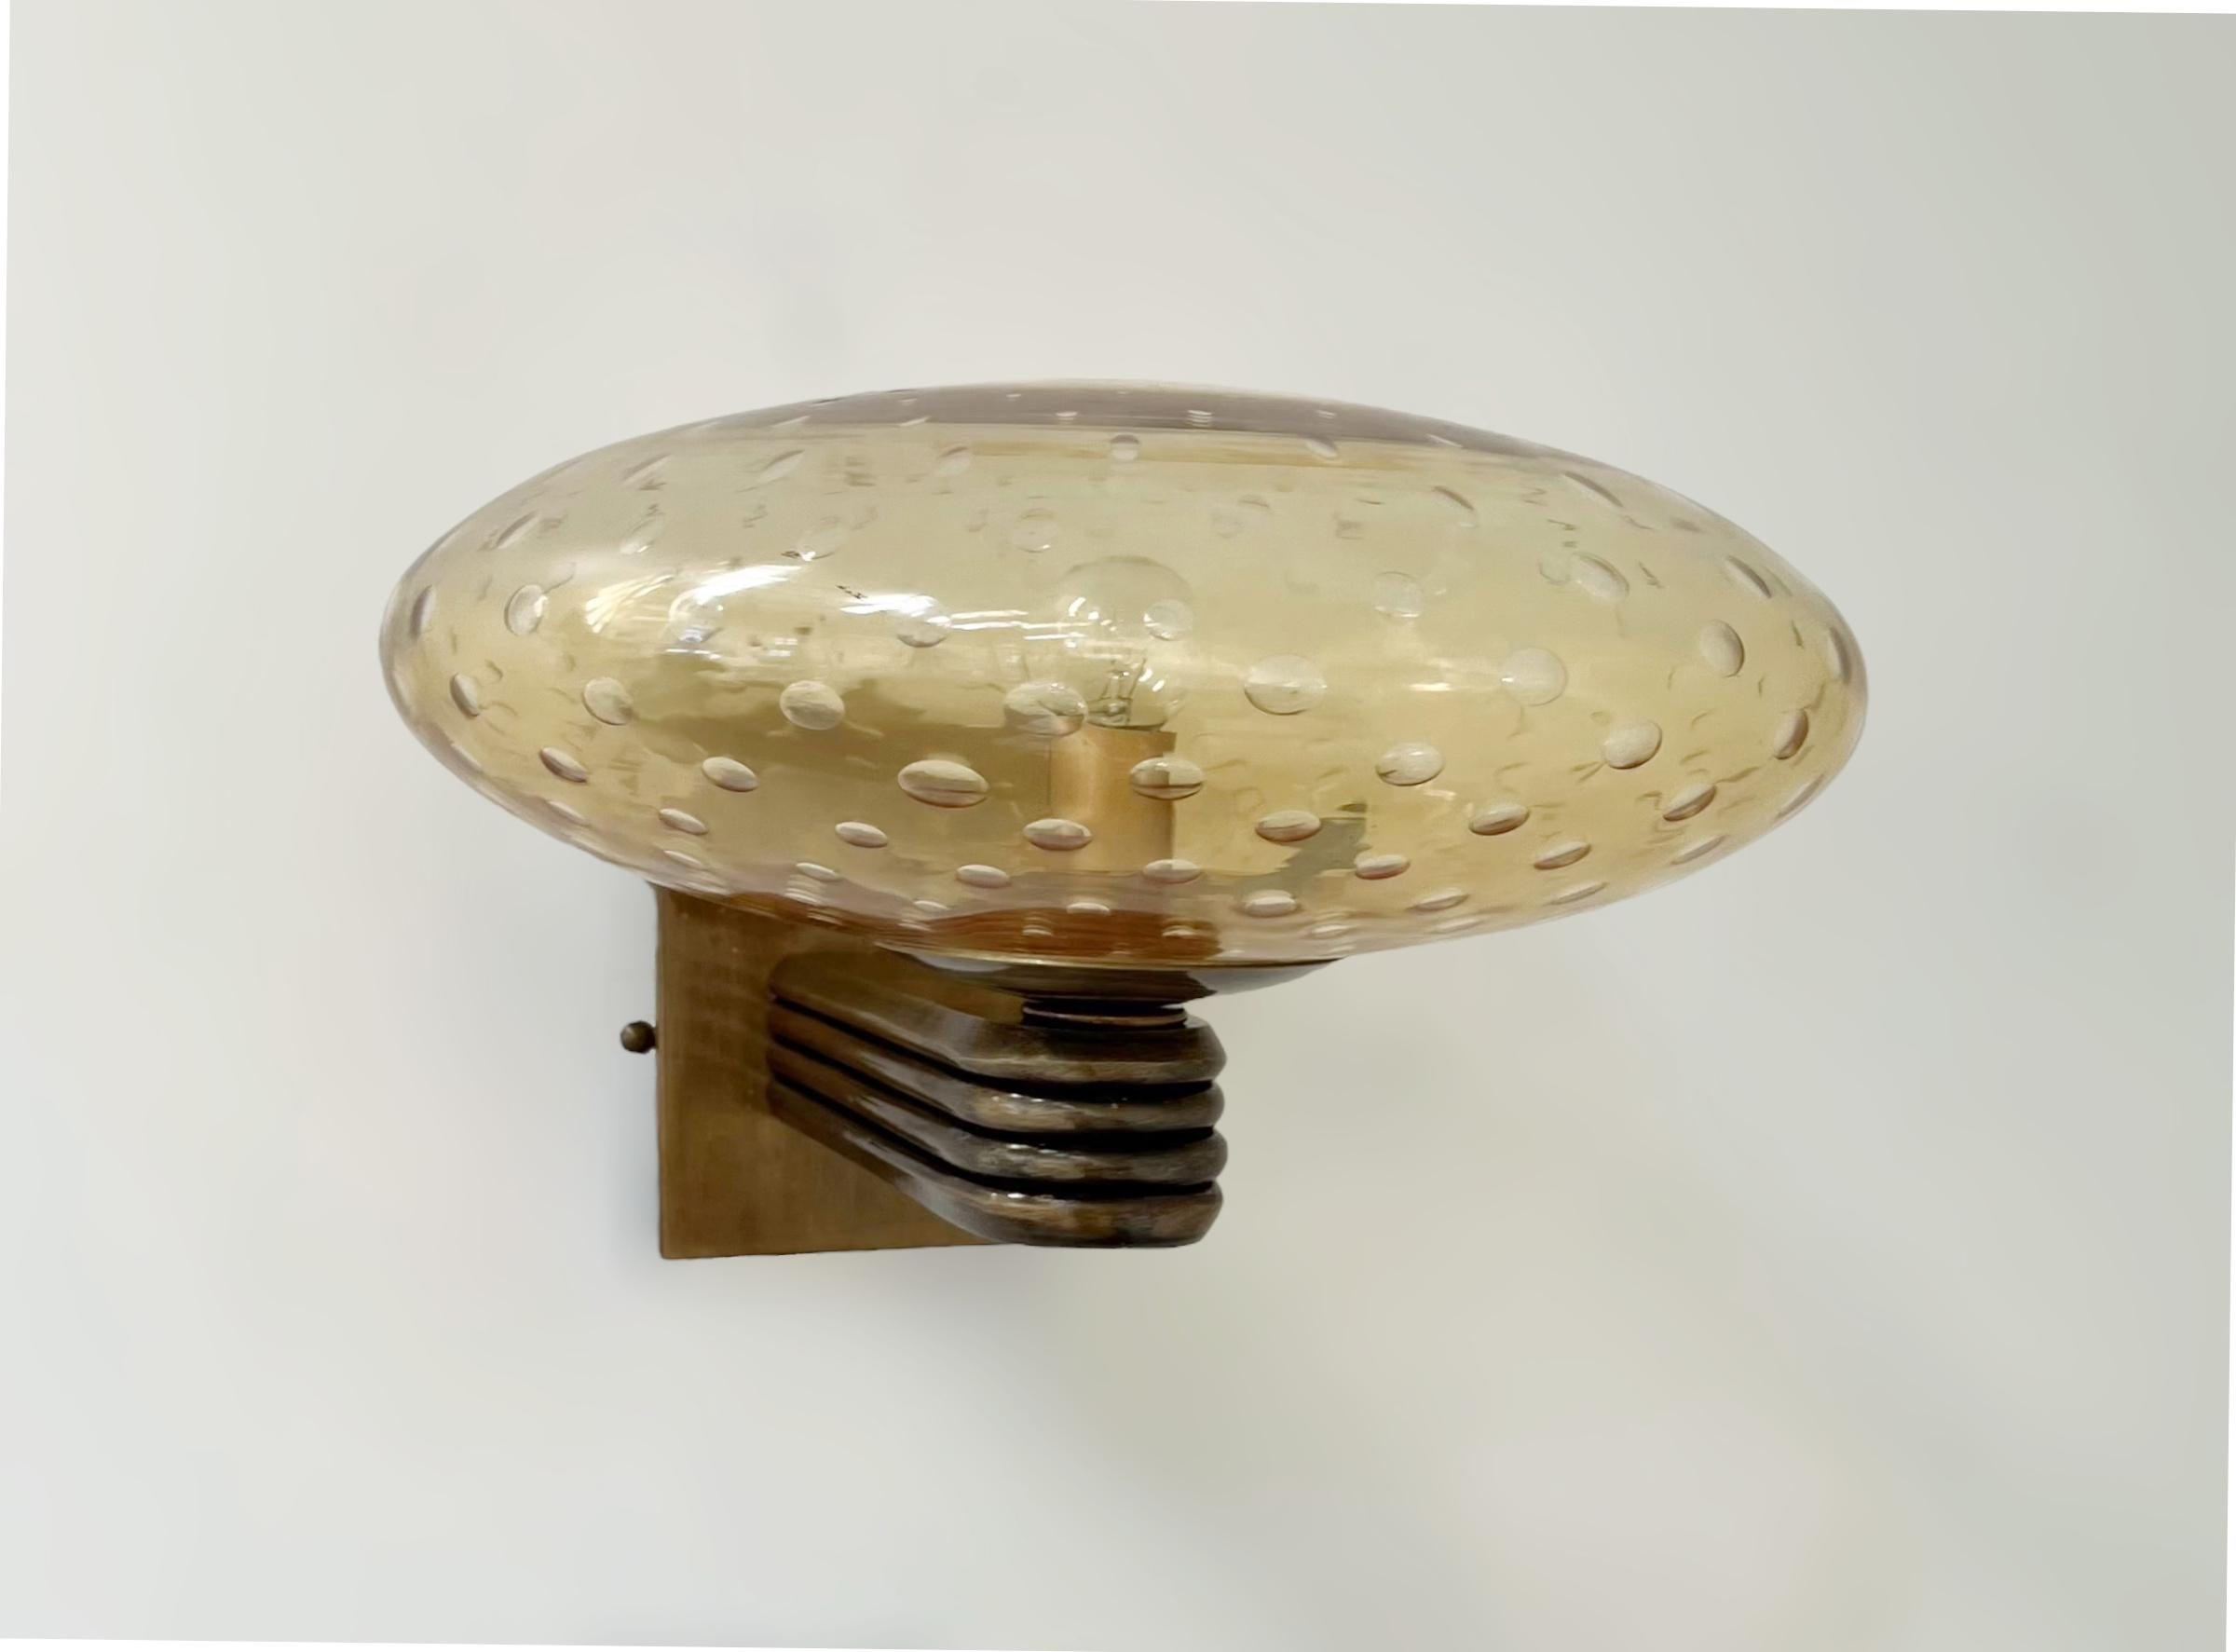 Italian Art Deco style wall light with amber Murano glass shade hand blown with bubbles inside the glass using Bollicine technique, mounted on bronzed finish frame / Designed by Fabio Bergomi for Fabio Ltd / Made in Italy
1 light / E12 or E14 type /